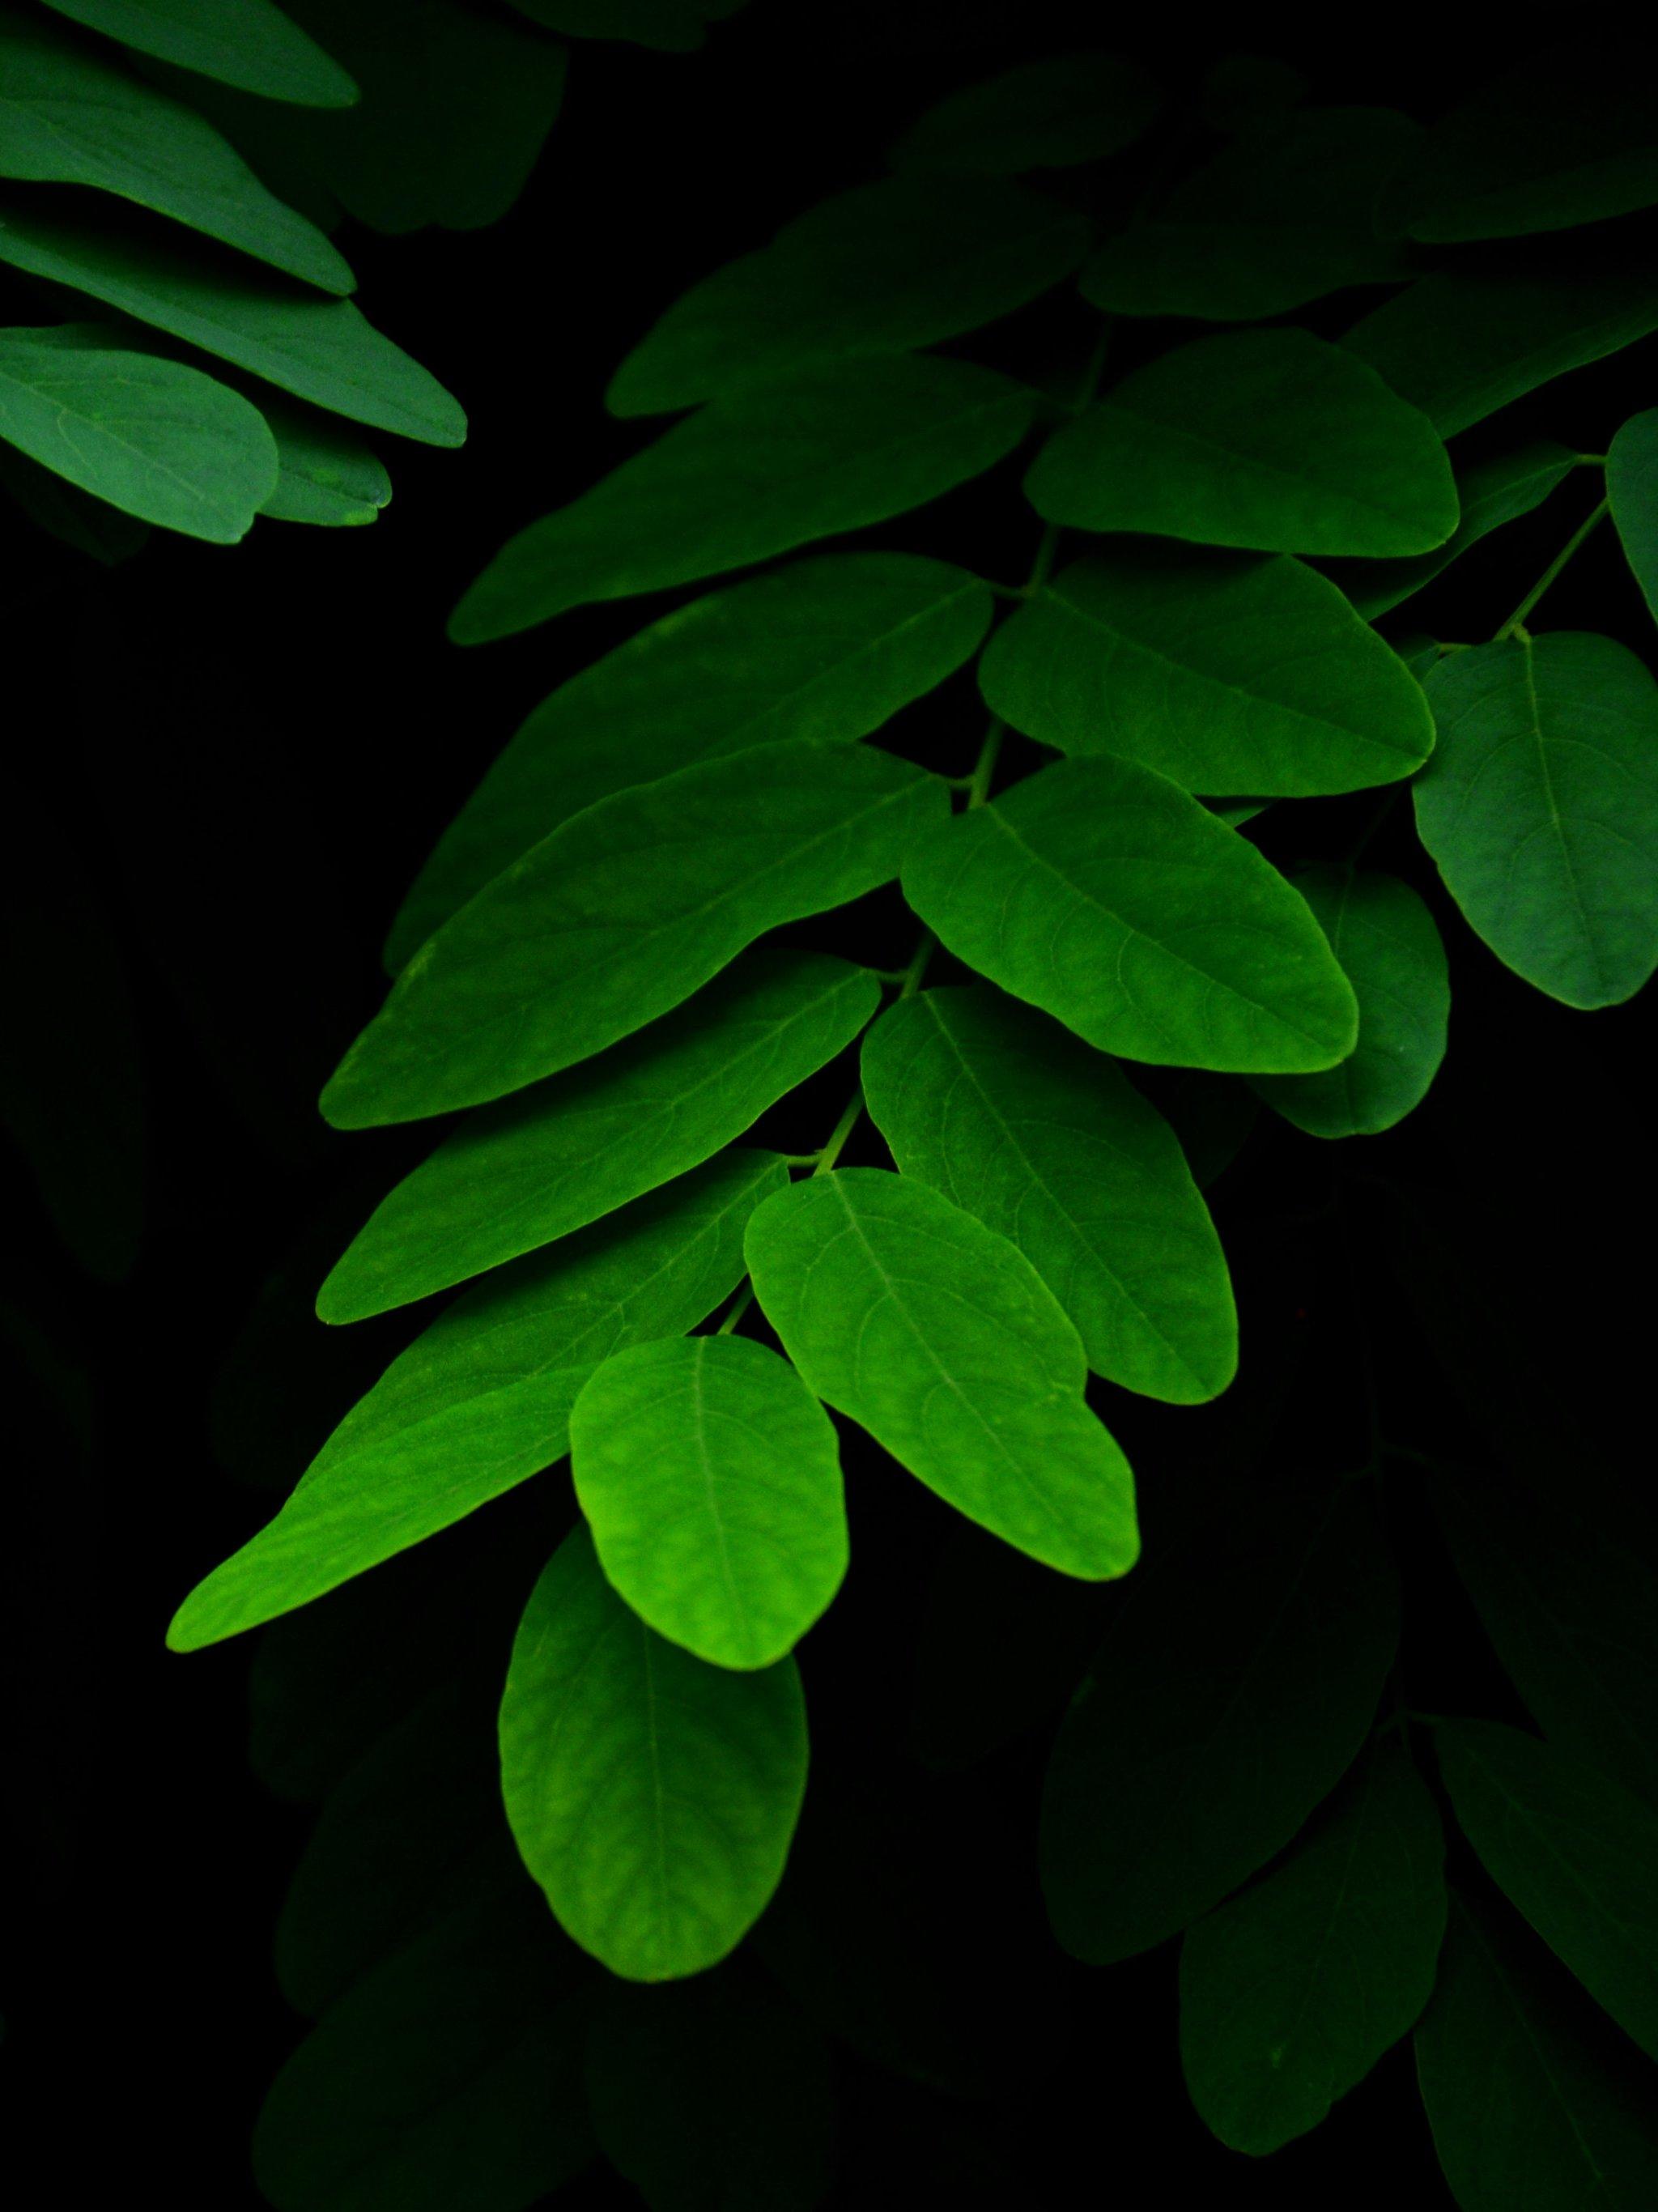 Leaves on Black Background Wallpaper, Android